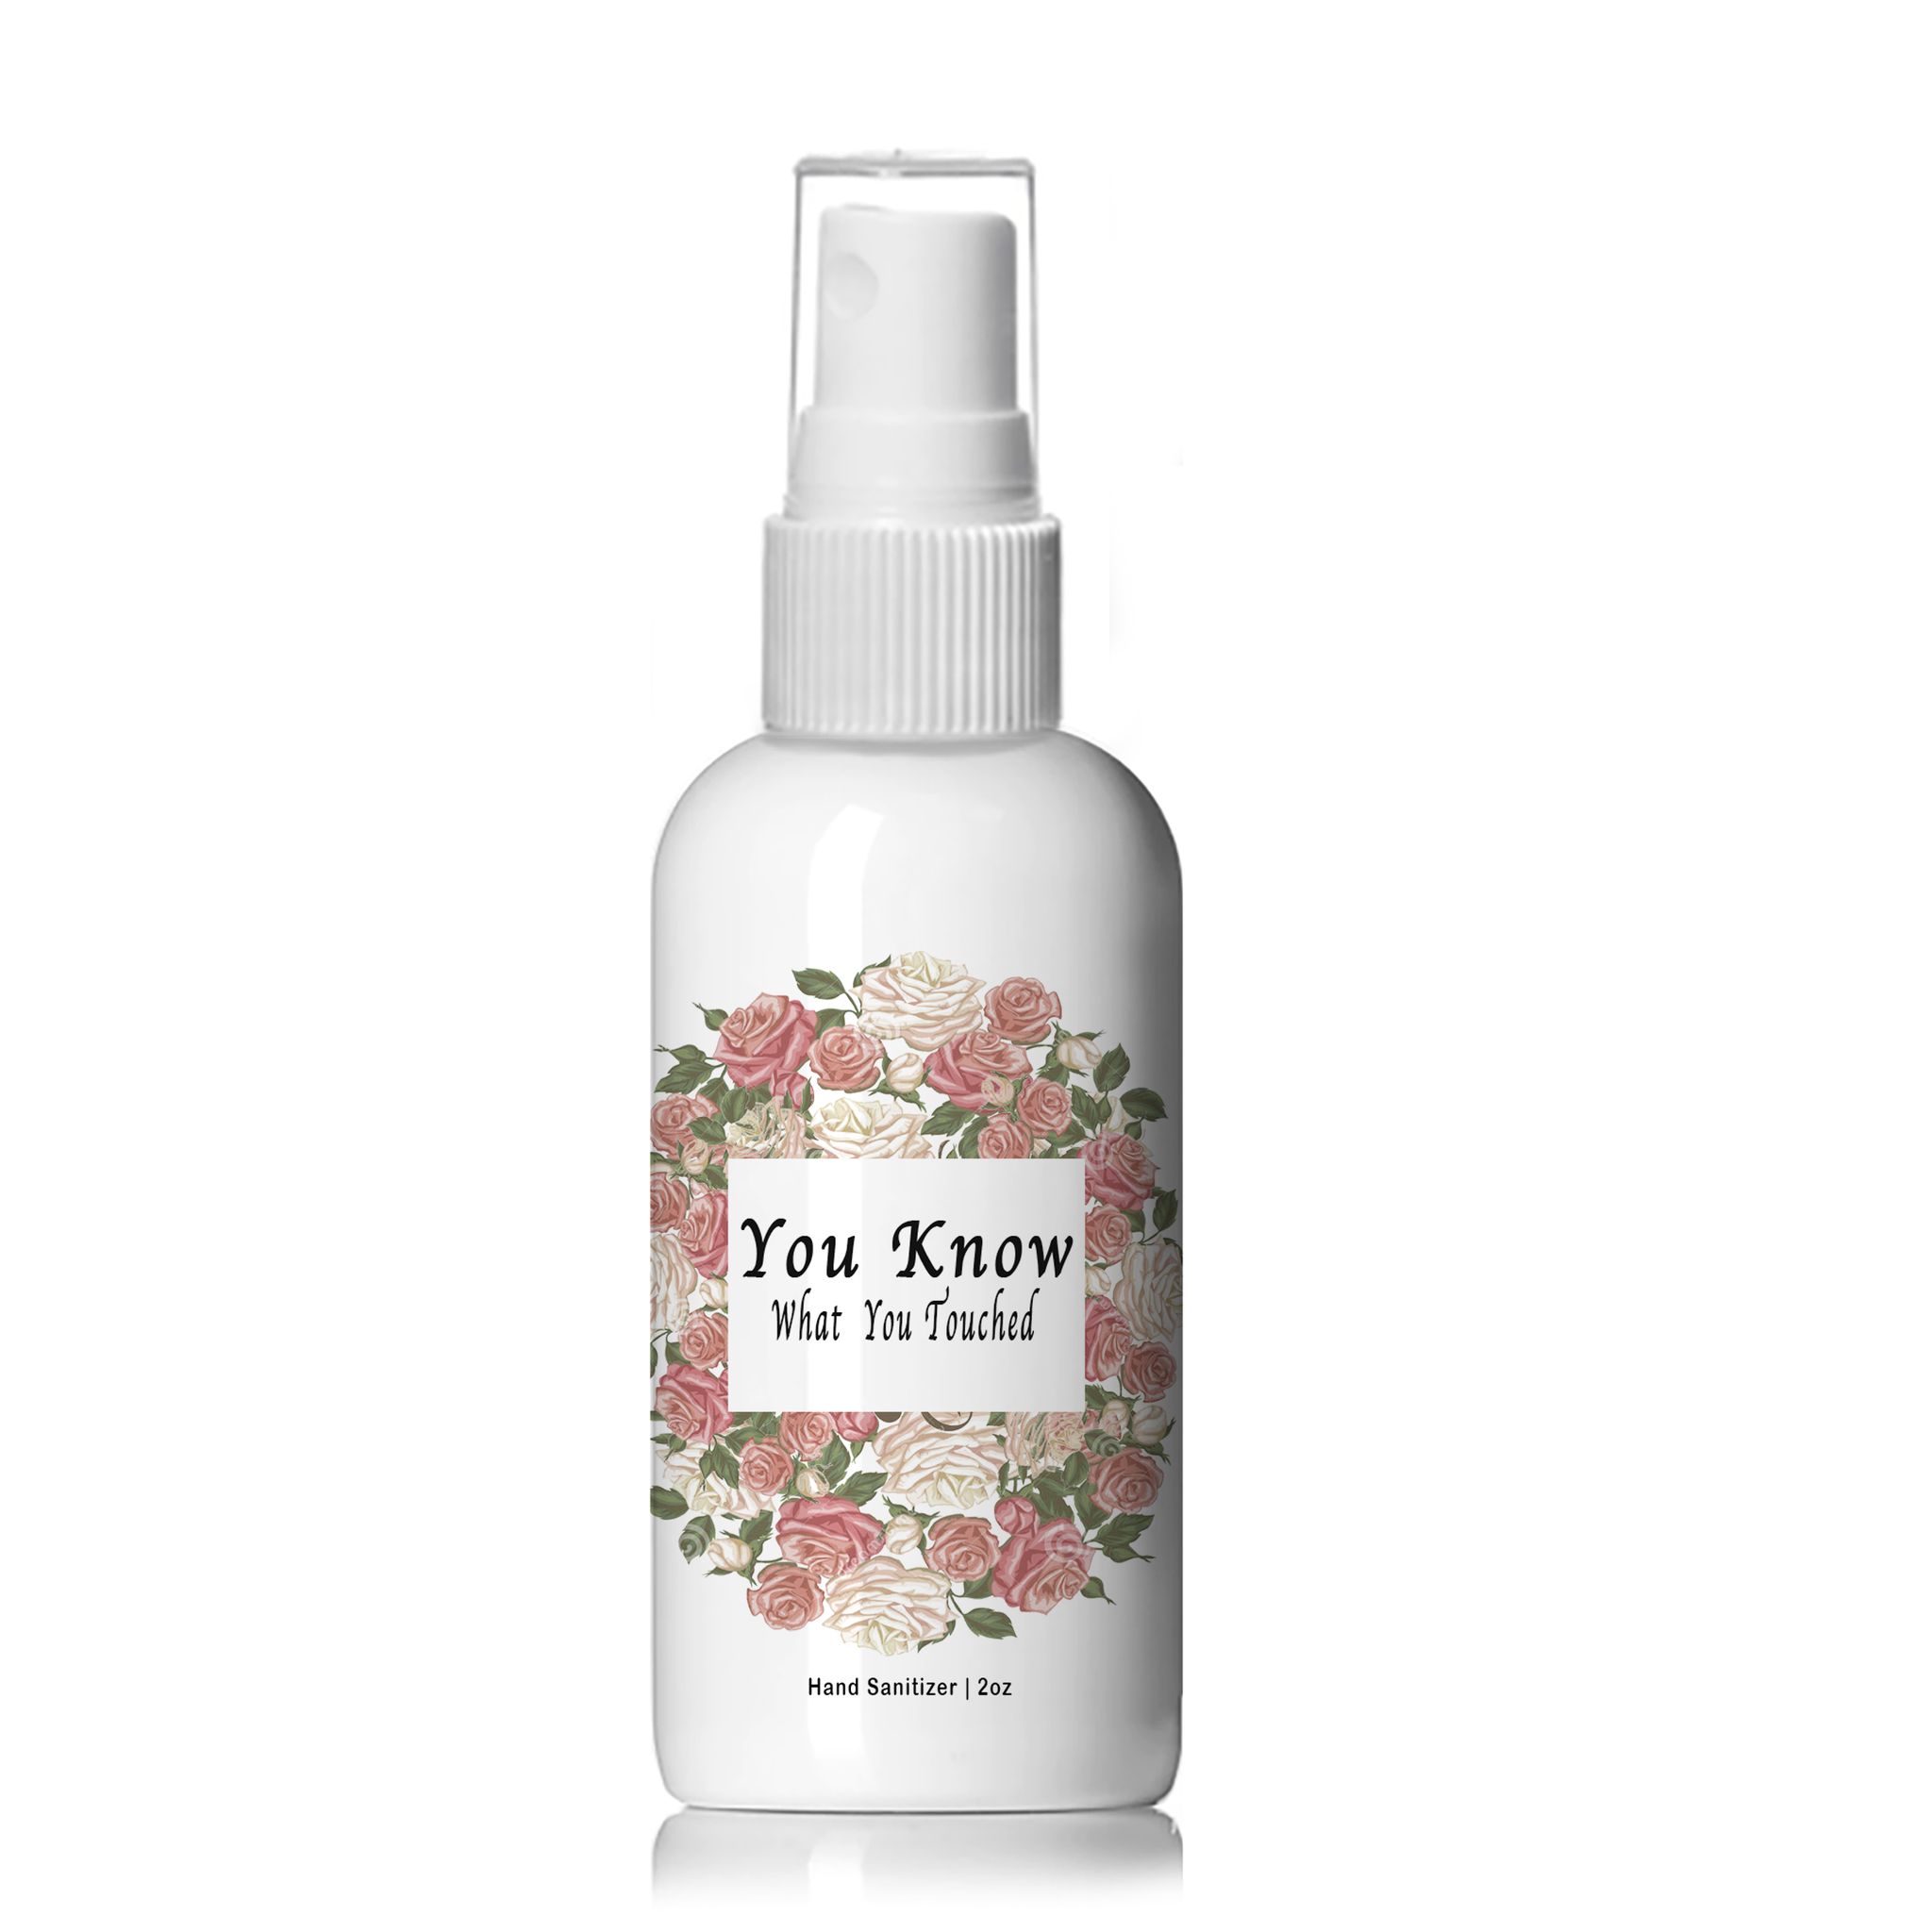 You Know What You Touched Hand Sanitizer - 4oz Spray Bottle